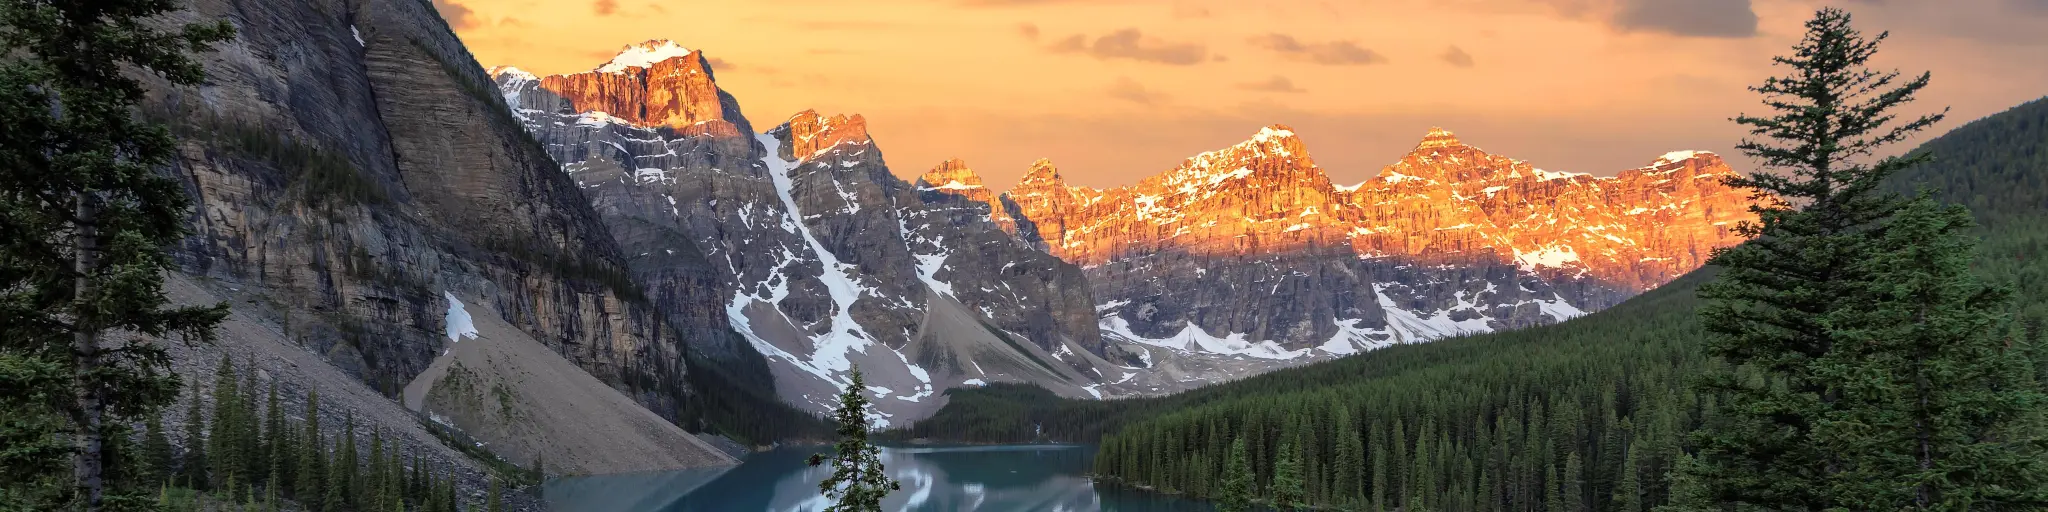 Dramatic sunrise at the Moraine lake in Banff National Park, snow capped mountains in the background